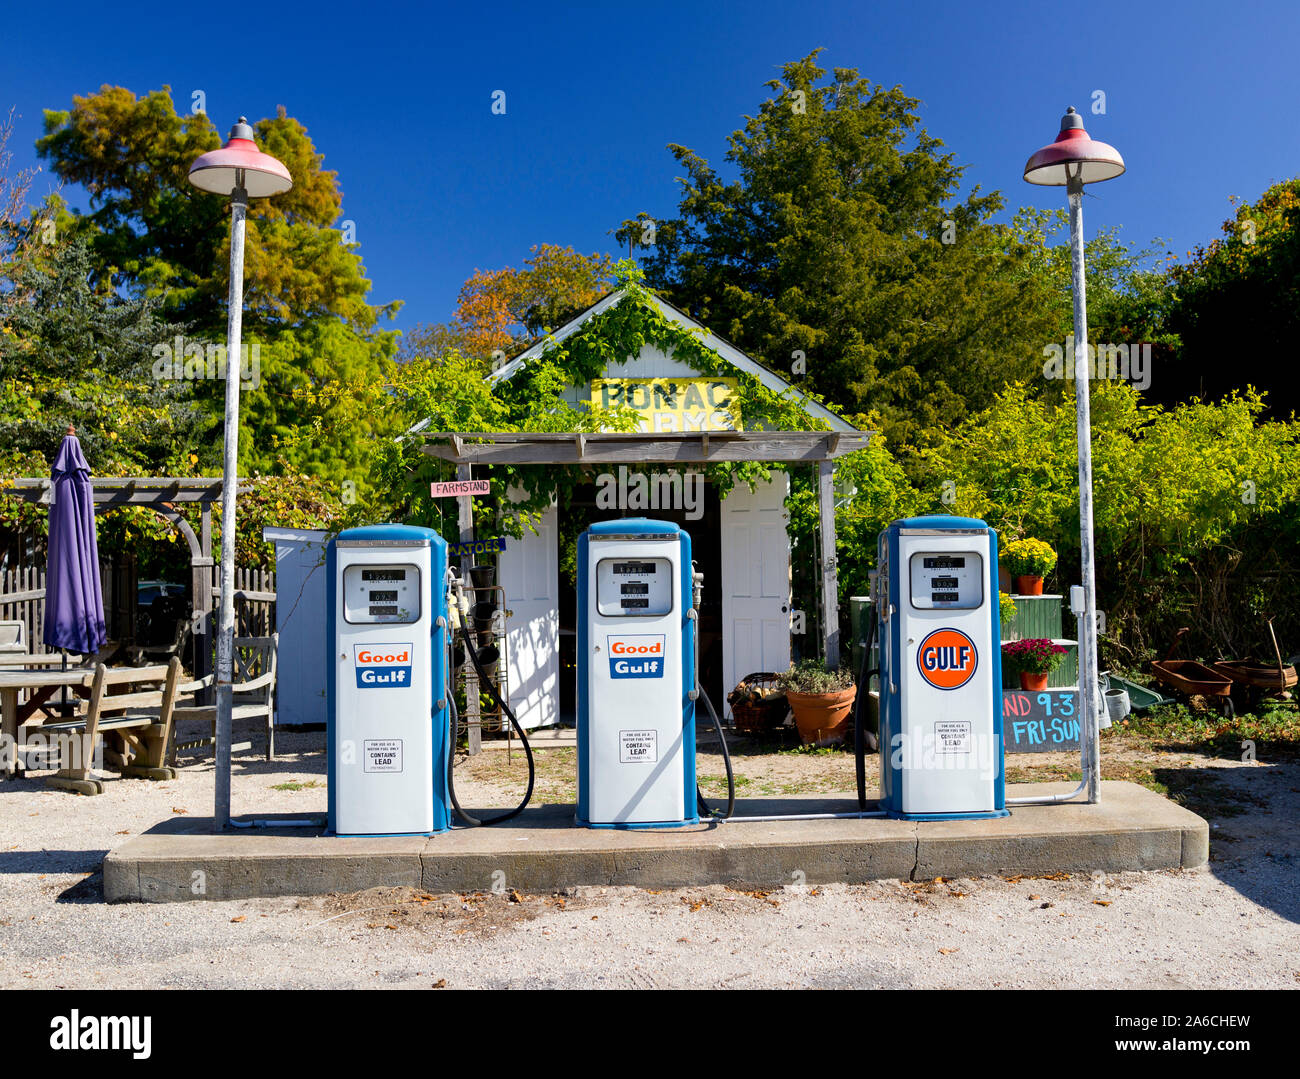 Three antique gas pumps with dirt road.  Small shed in rear.  Rural setting with trees and vines.  Full color horizontal photograph. Stock Photo